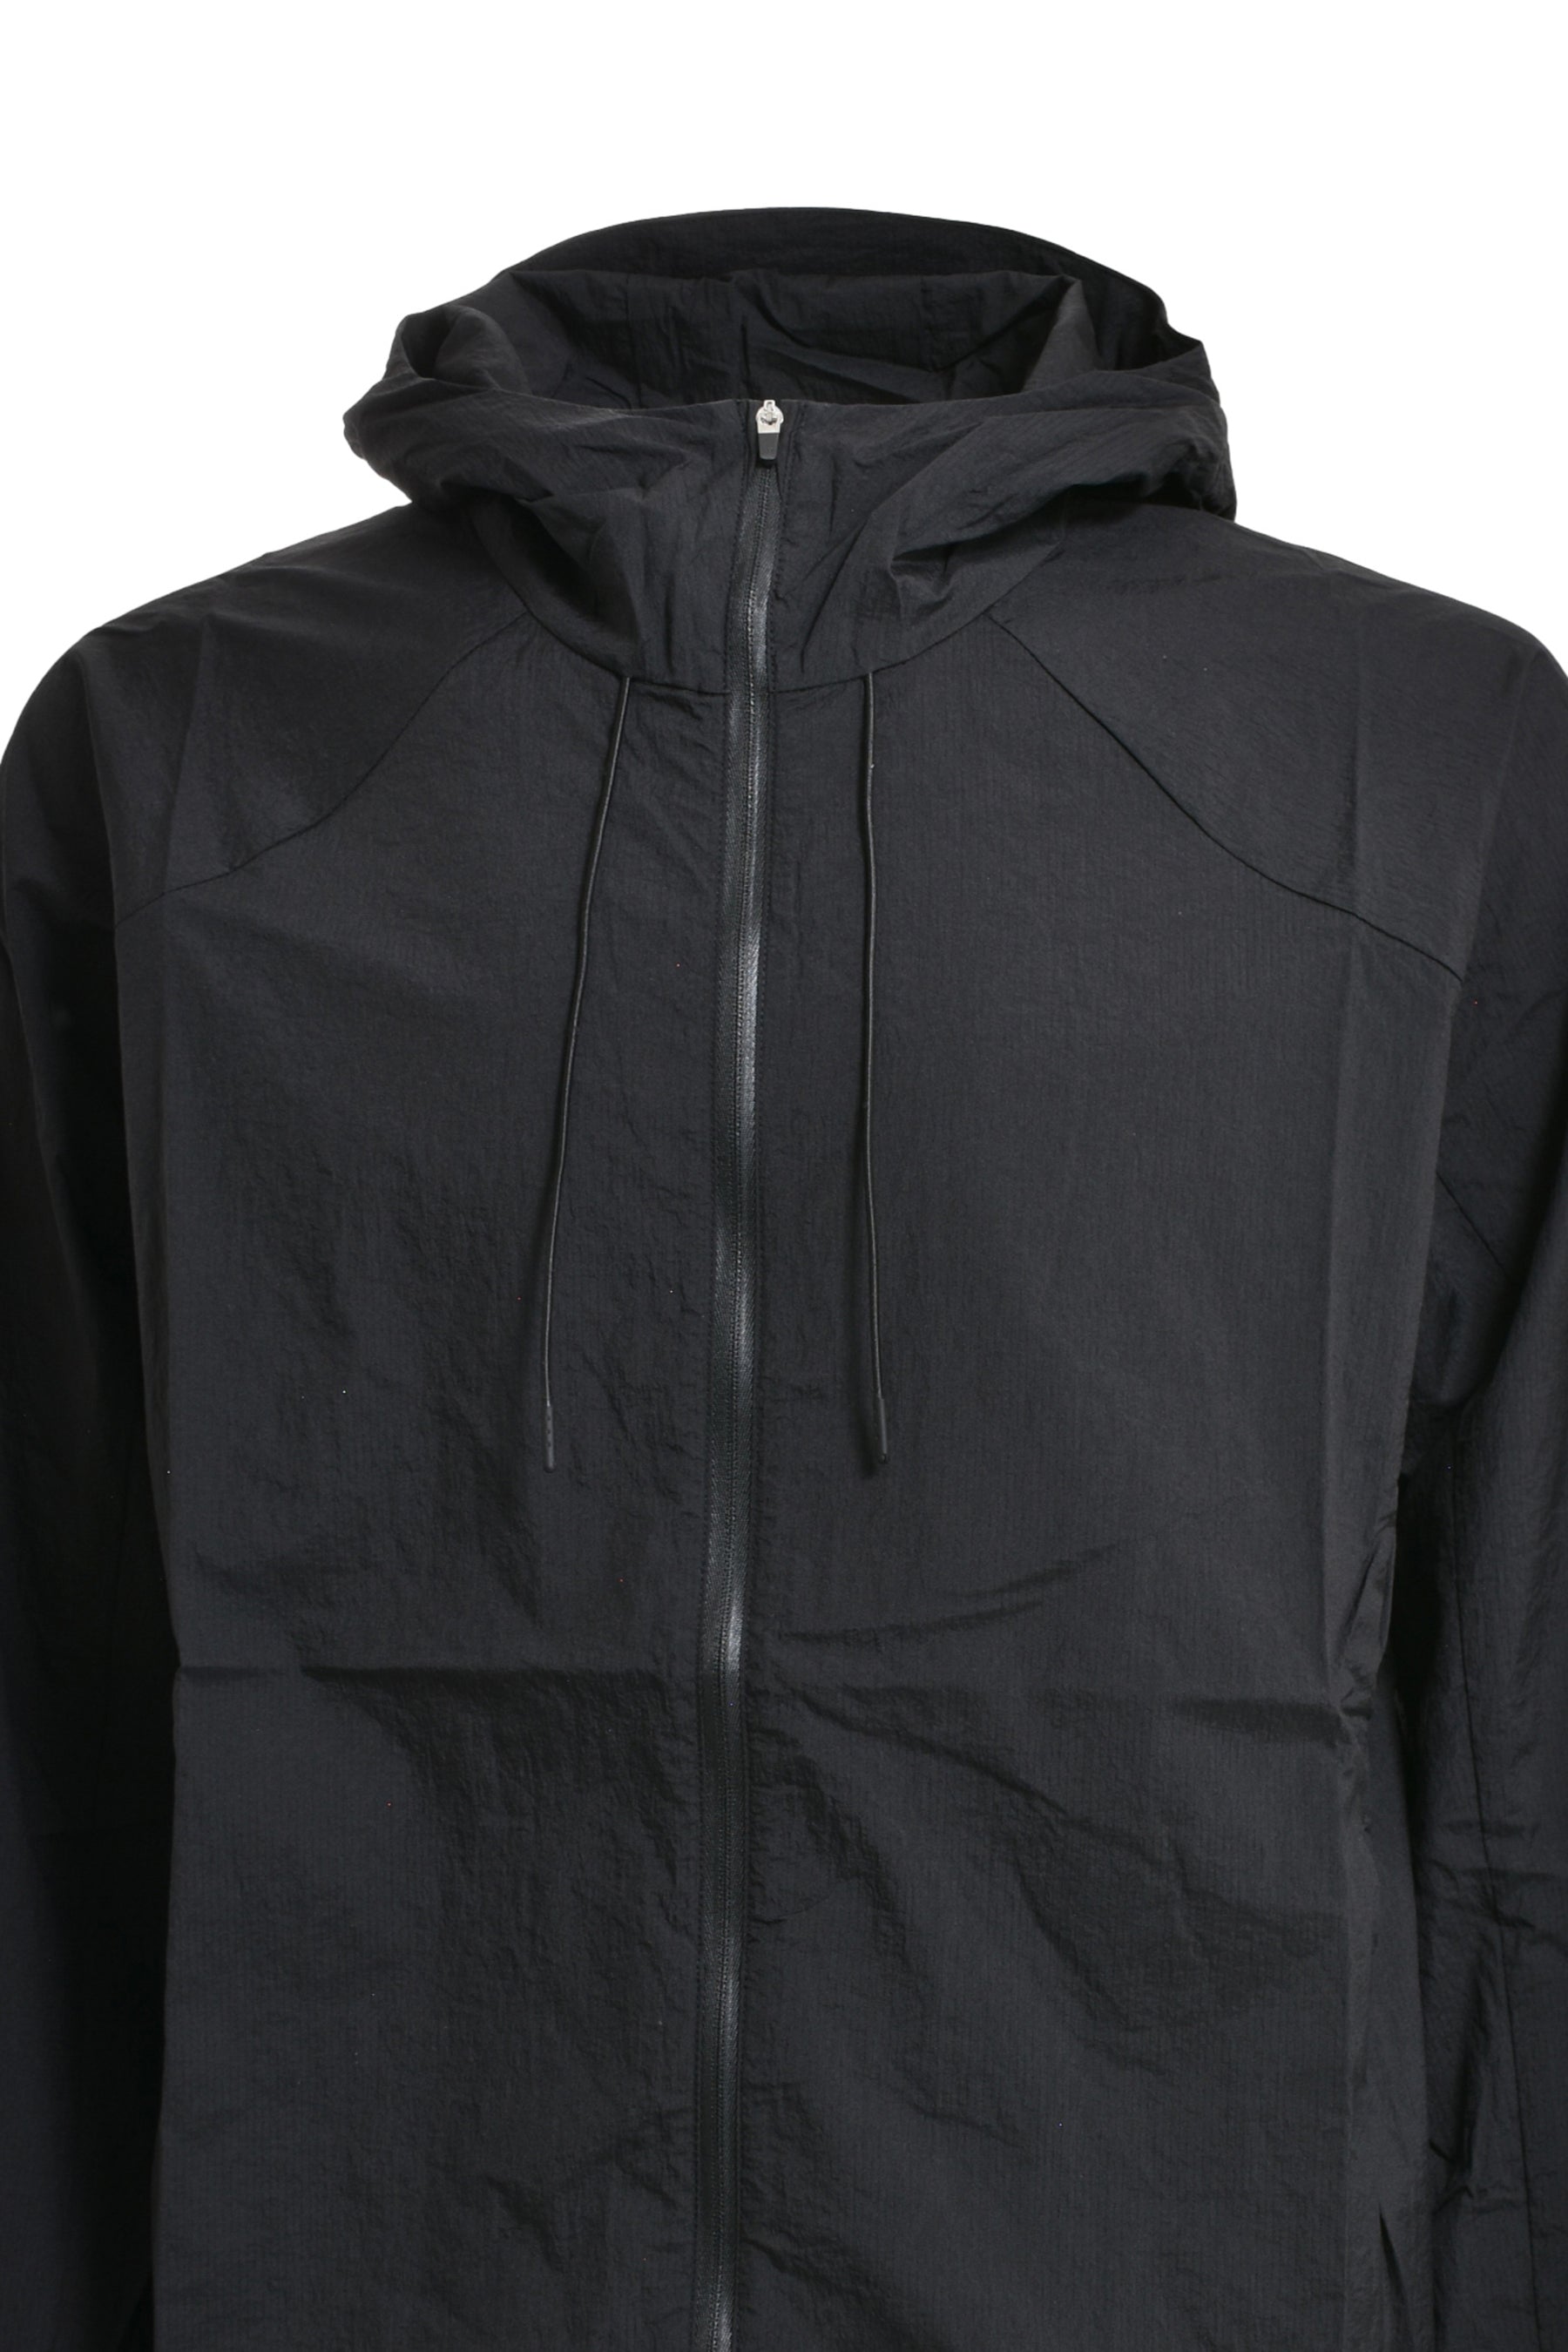 paf 5.0+ TECHNICAL JACKET RIGHTナイロンジャケット